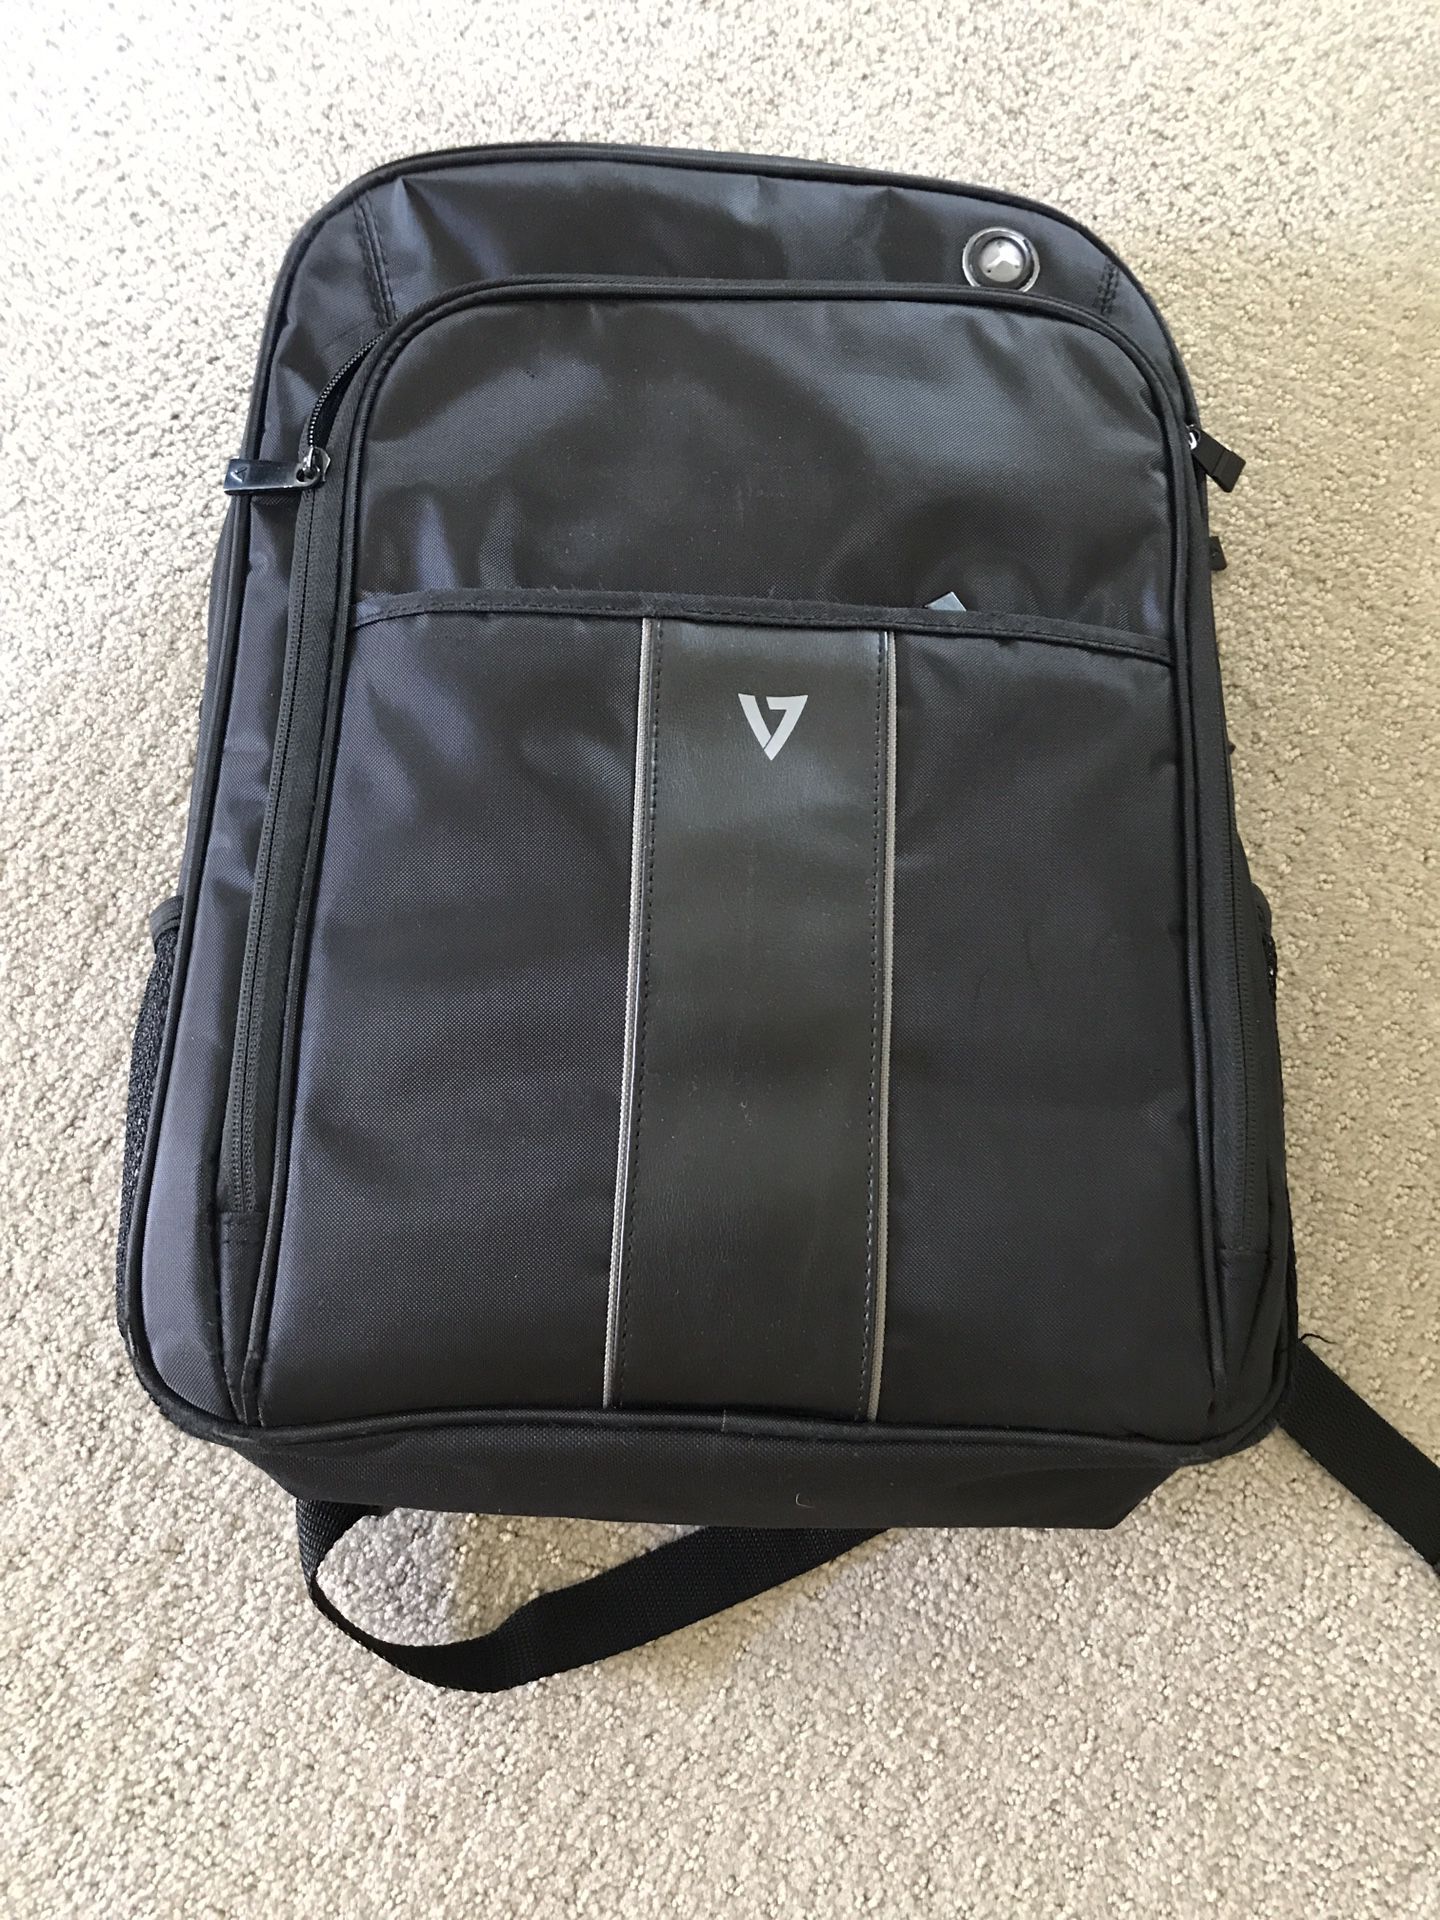 Black backpack for computer and notebooks